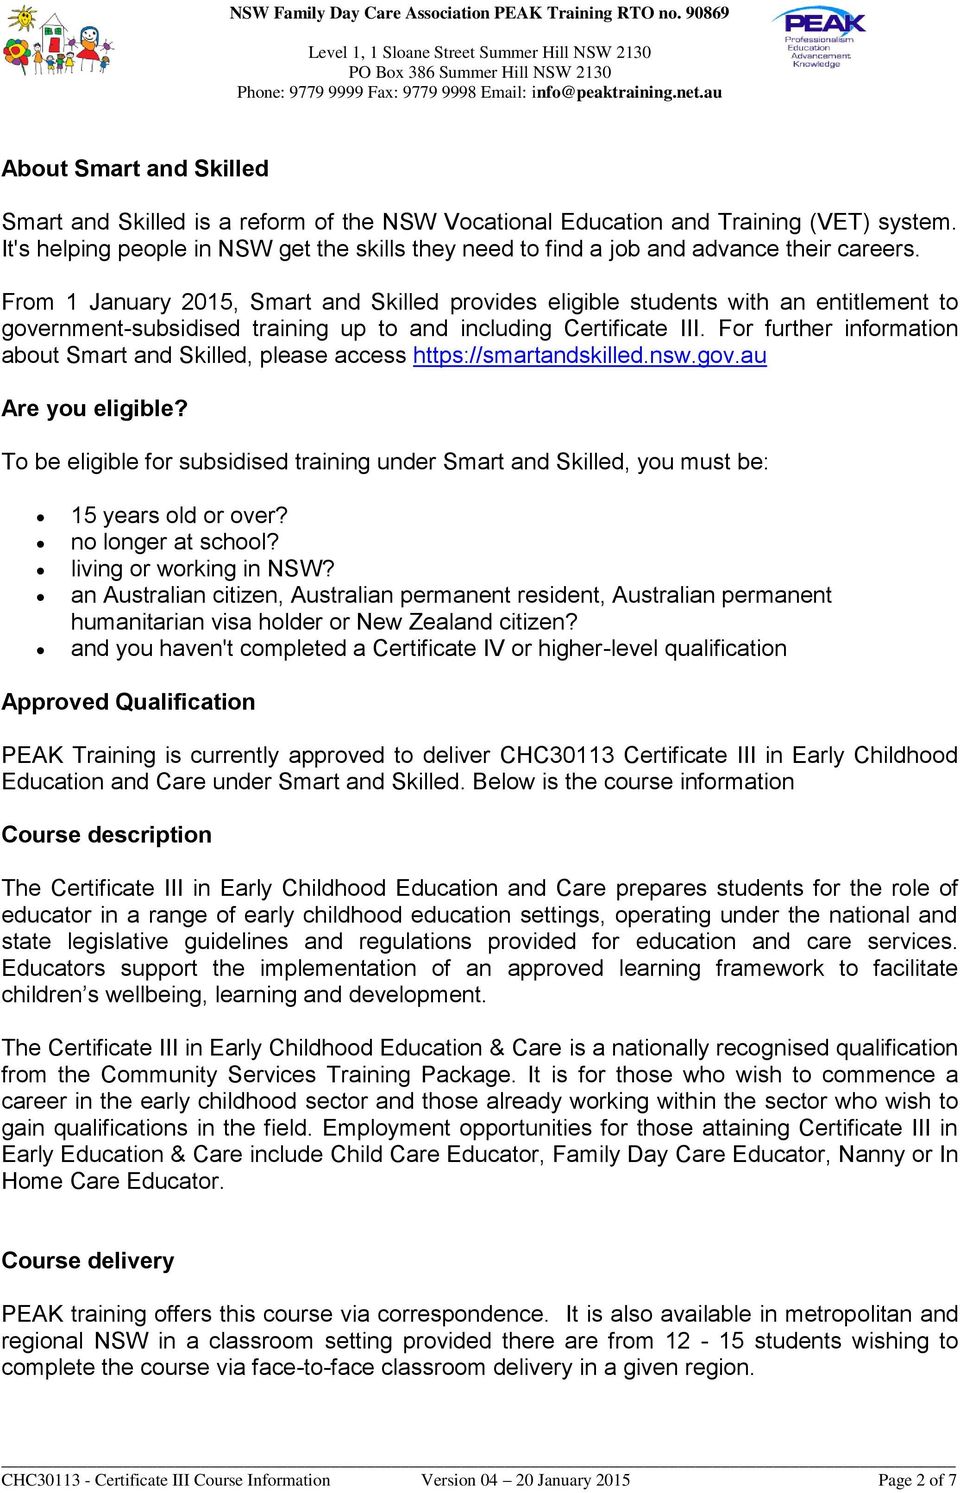 From 1 January 2015, Smart and Skilled provides eligible students with an entitlement to government-subsidised training up to and including Certificate III.